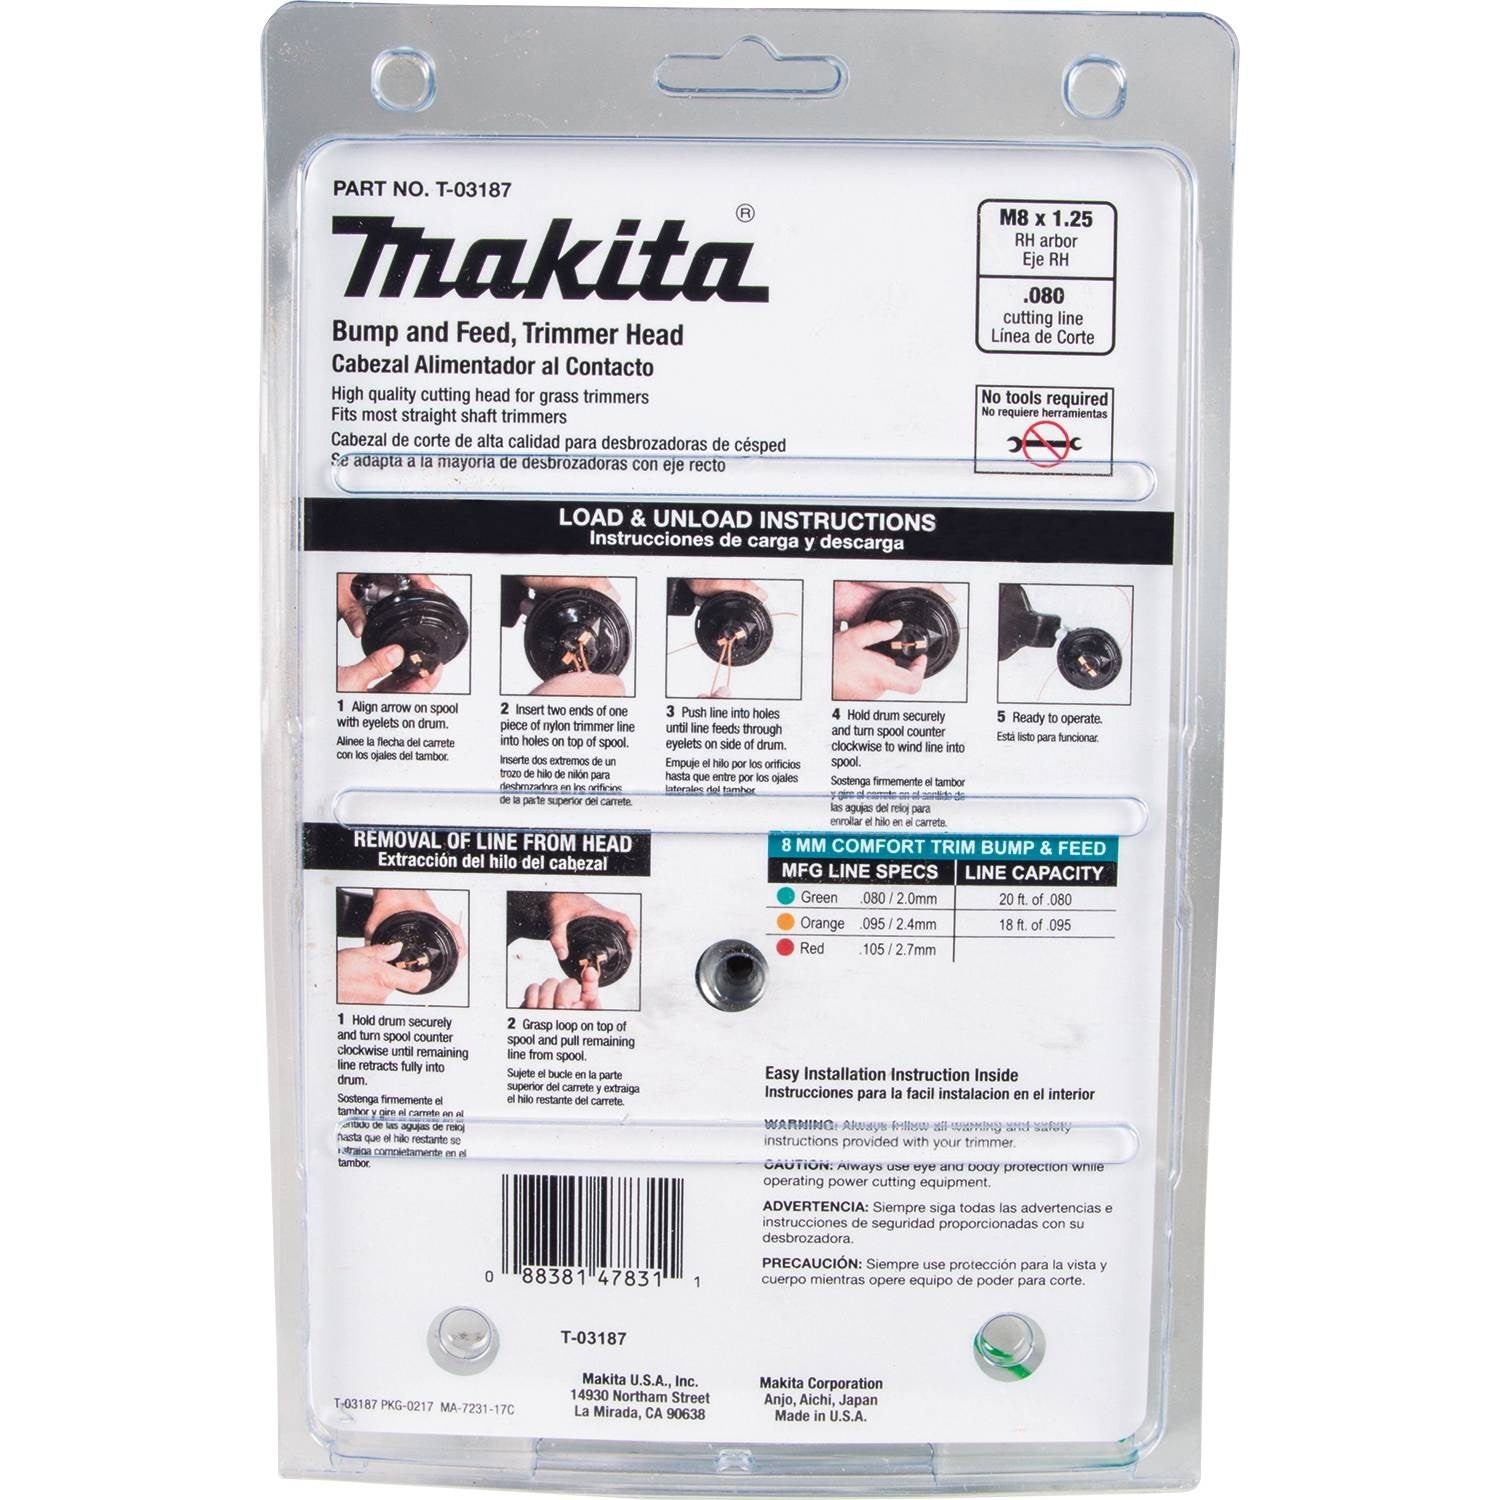 Makita T-03187 Trimmer Head, Bump and Feed, RH